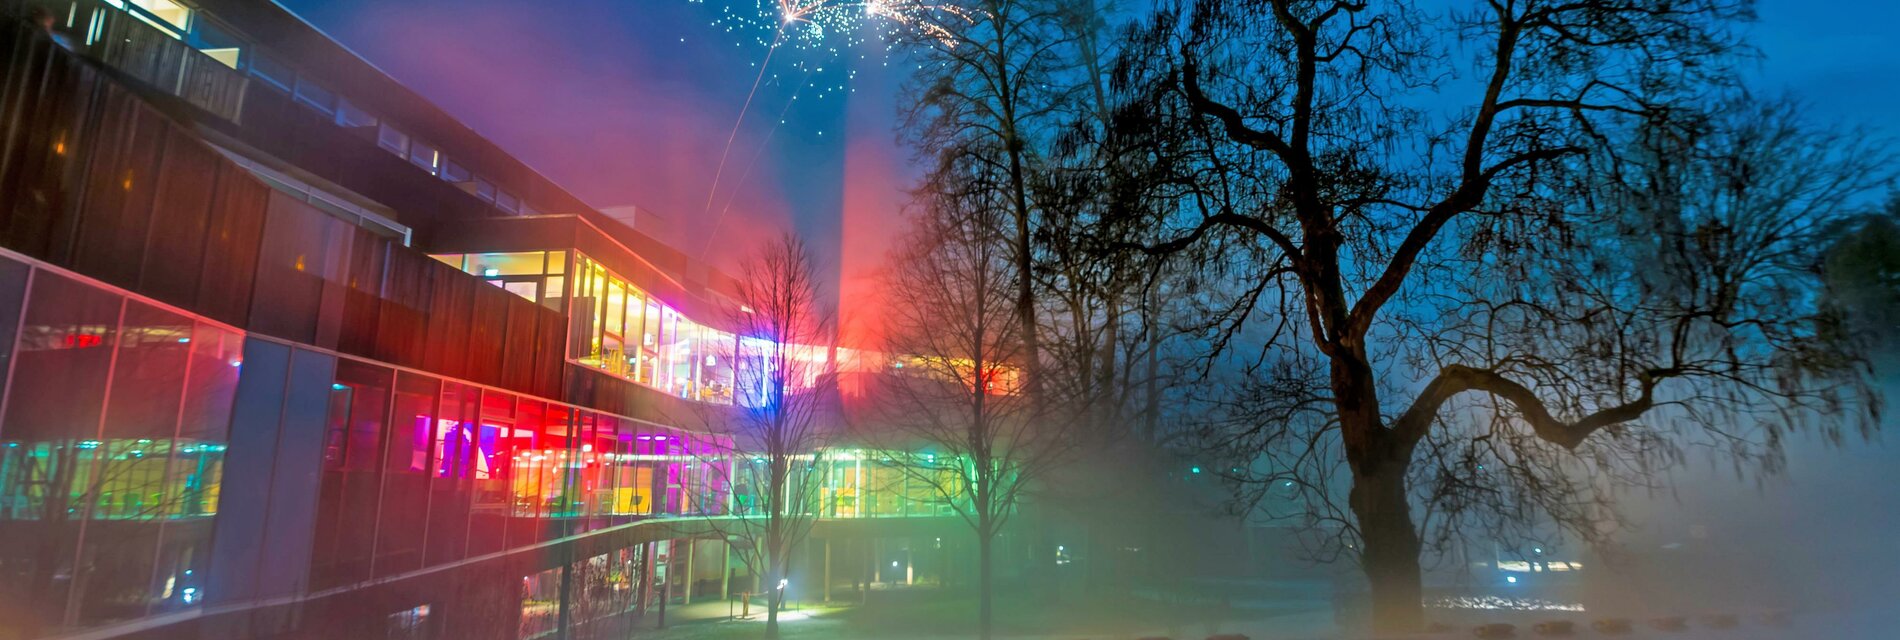 Silvester Therme der Ruhe